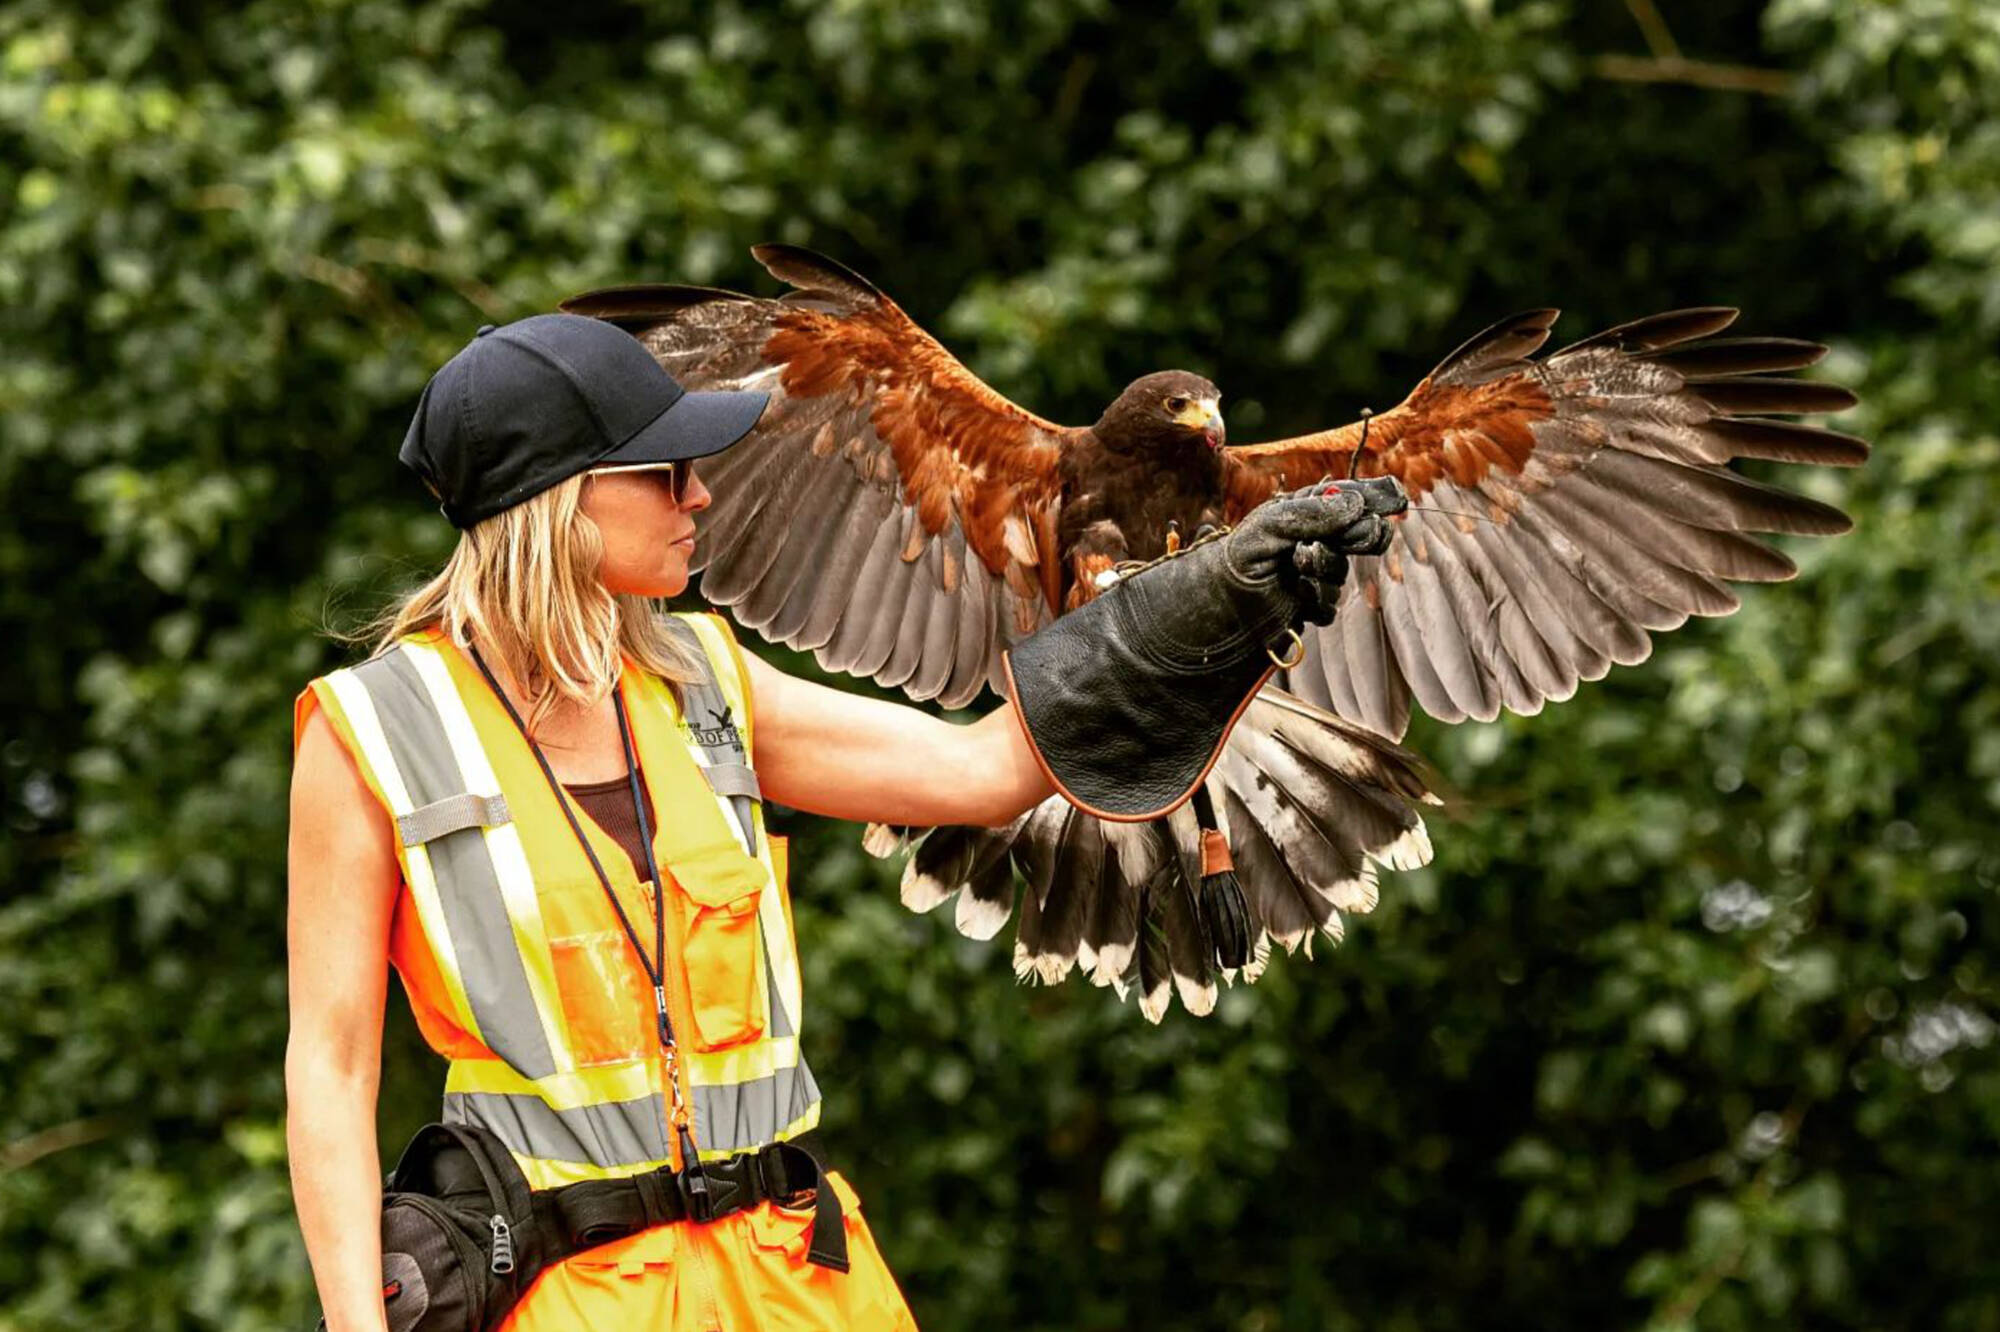 Shuswap Bird of Prey Services owner Mandy McDiarmid holds one of the Harris hawks she works with. (Romer photography)